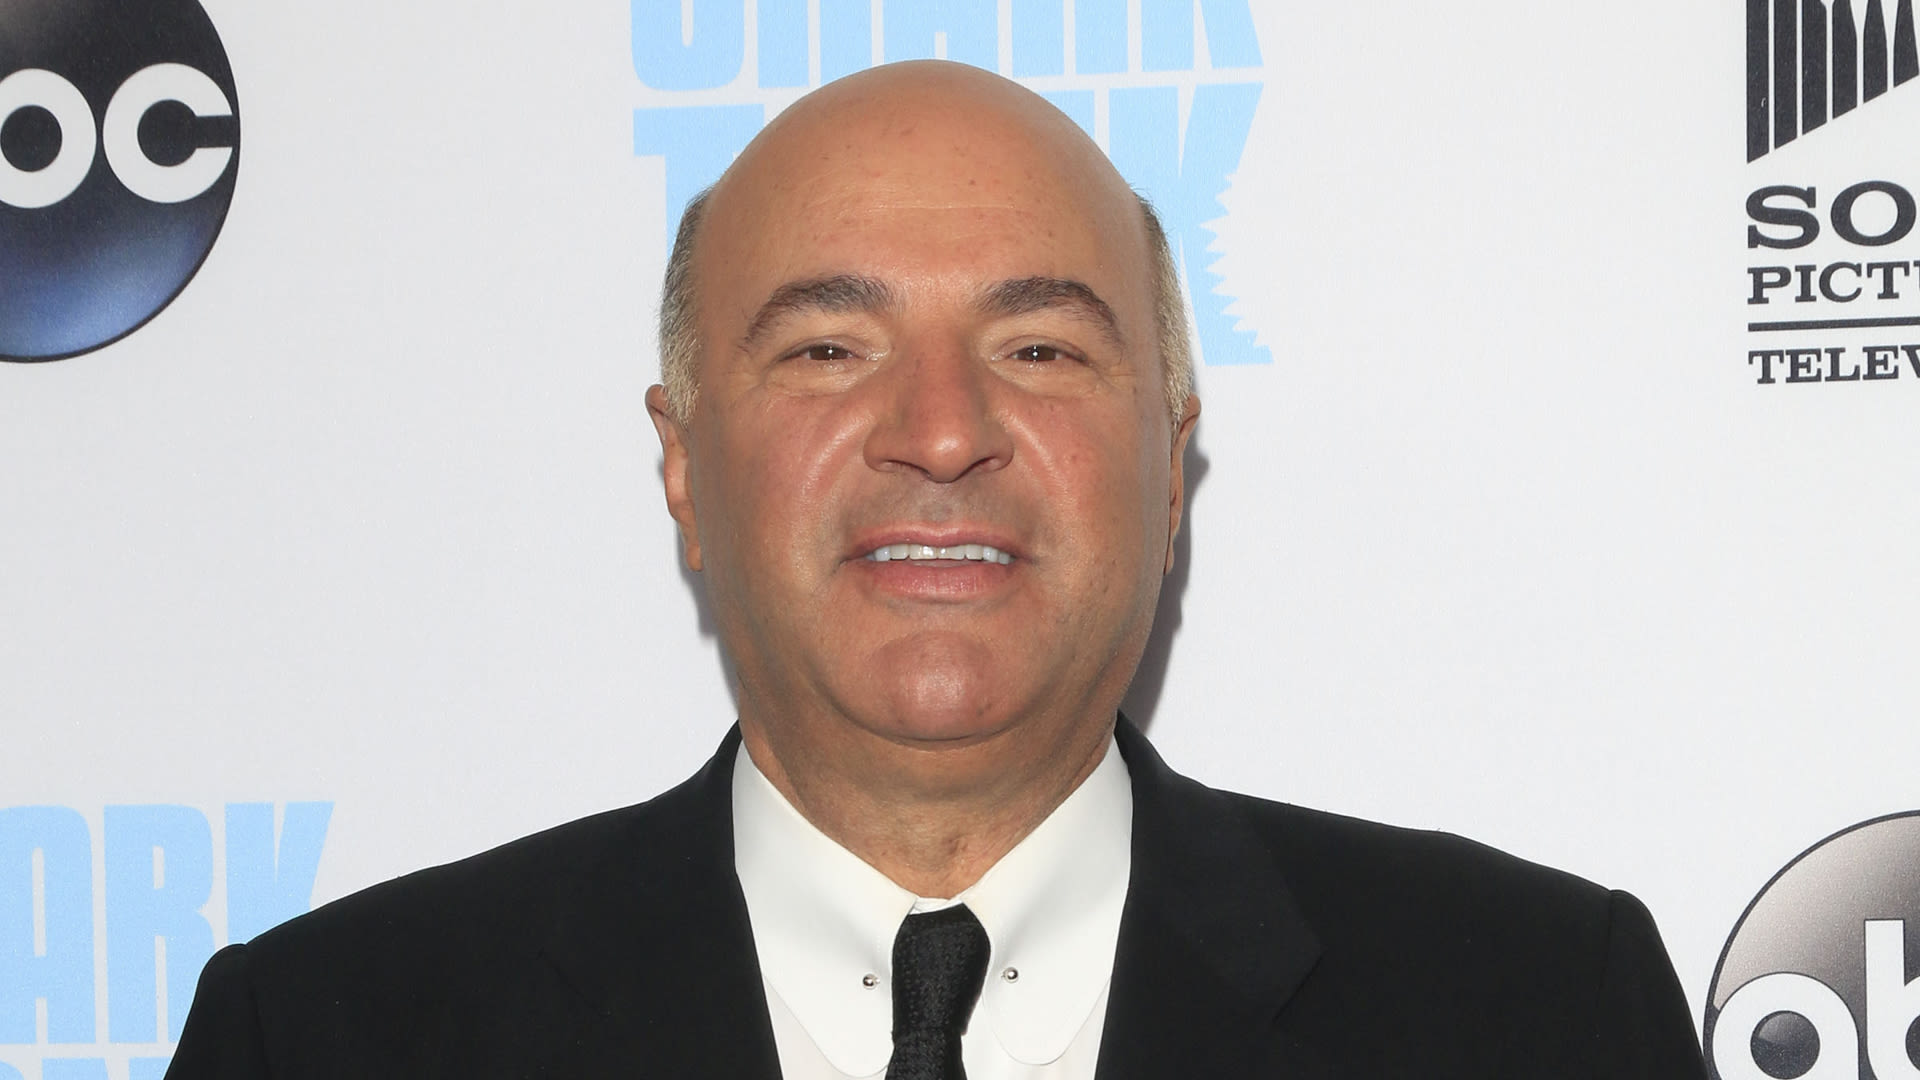 Kevin O’Leary Is Wrong About How Much You Need To Take Financial Risks, Experts Say